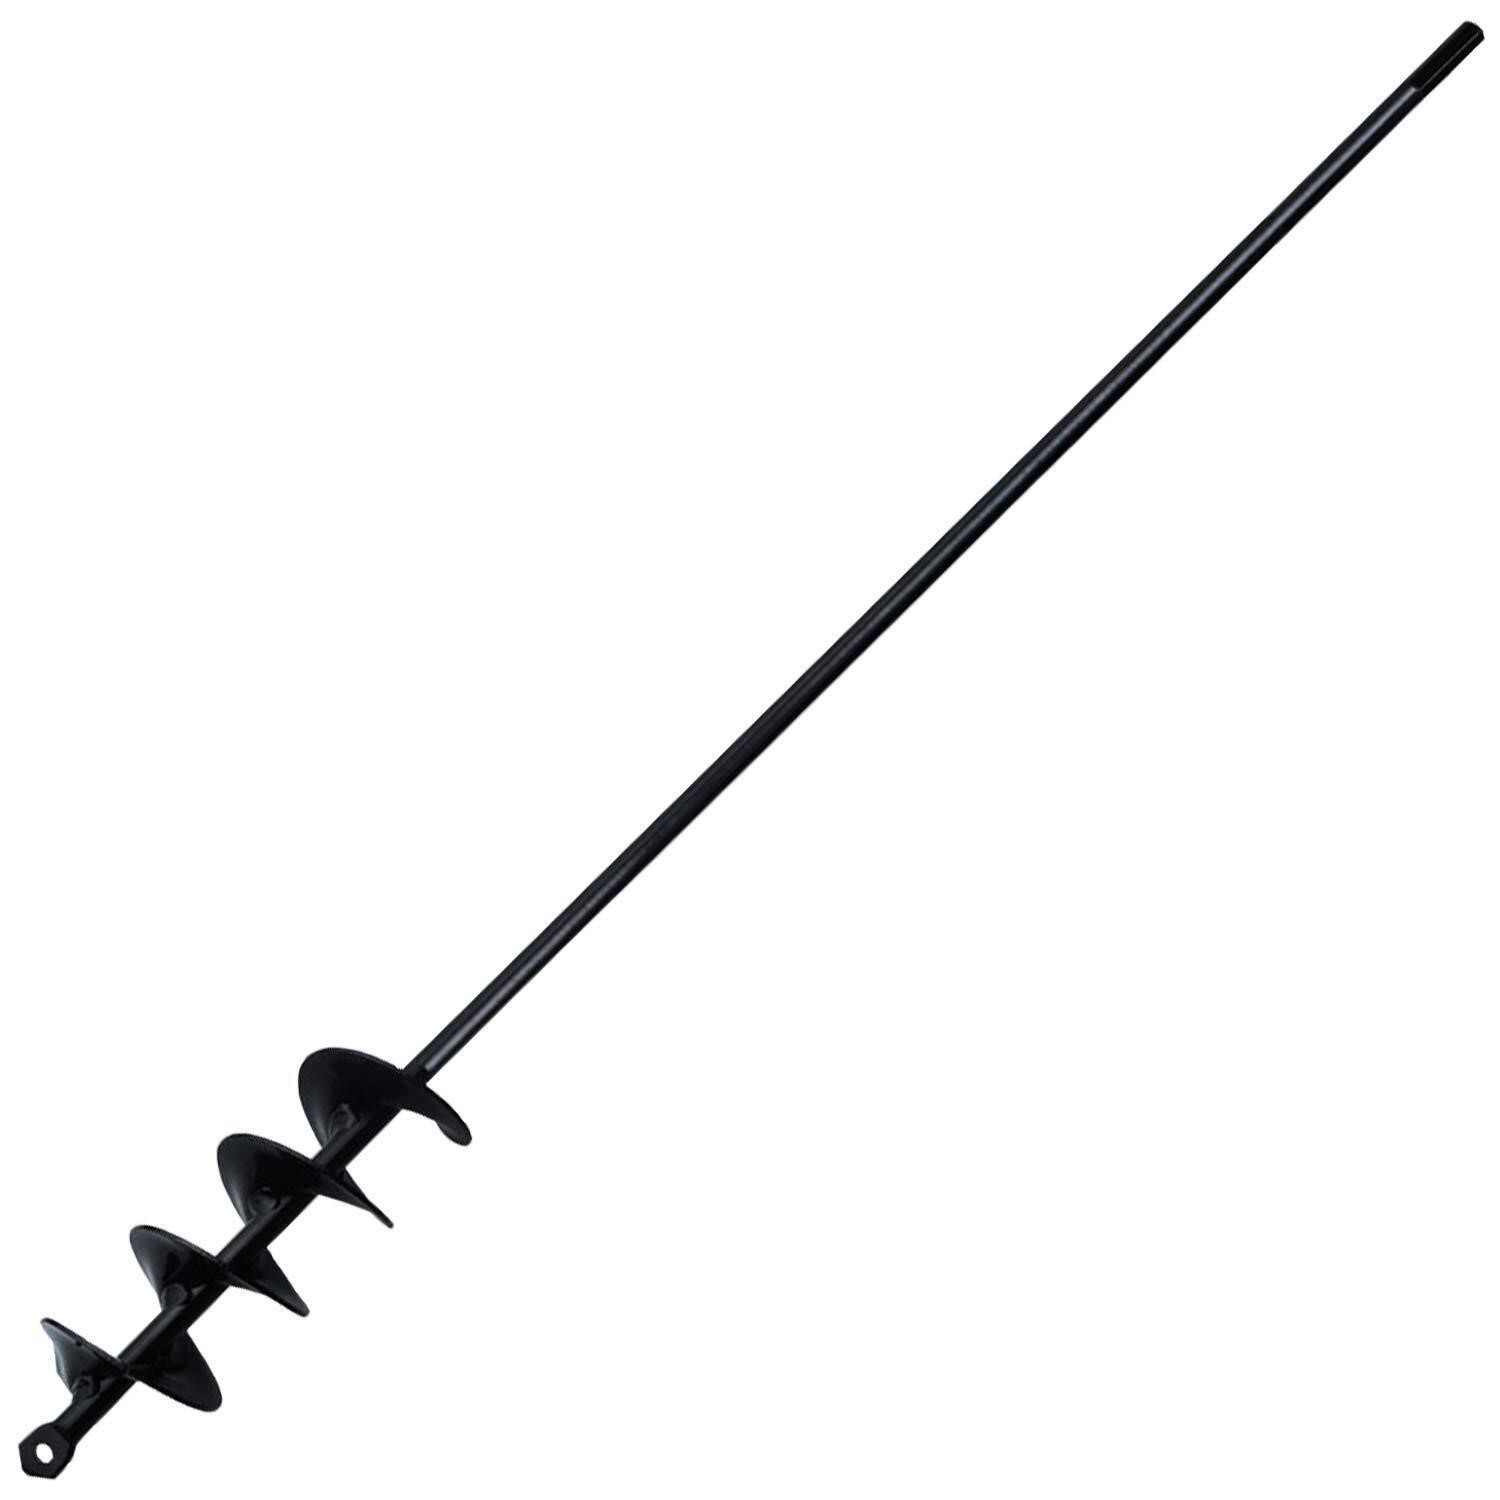 $20  Extended Length Auger Bit for Planting  30x2